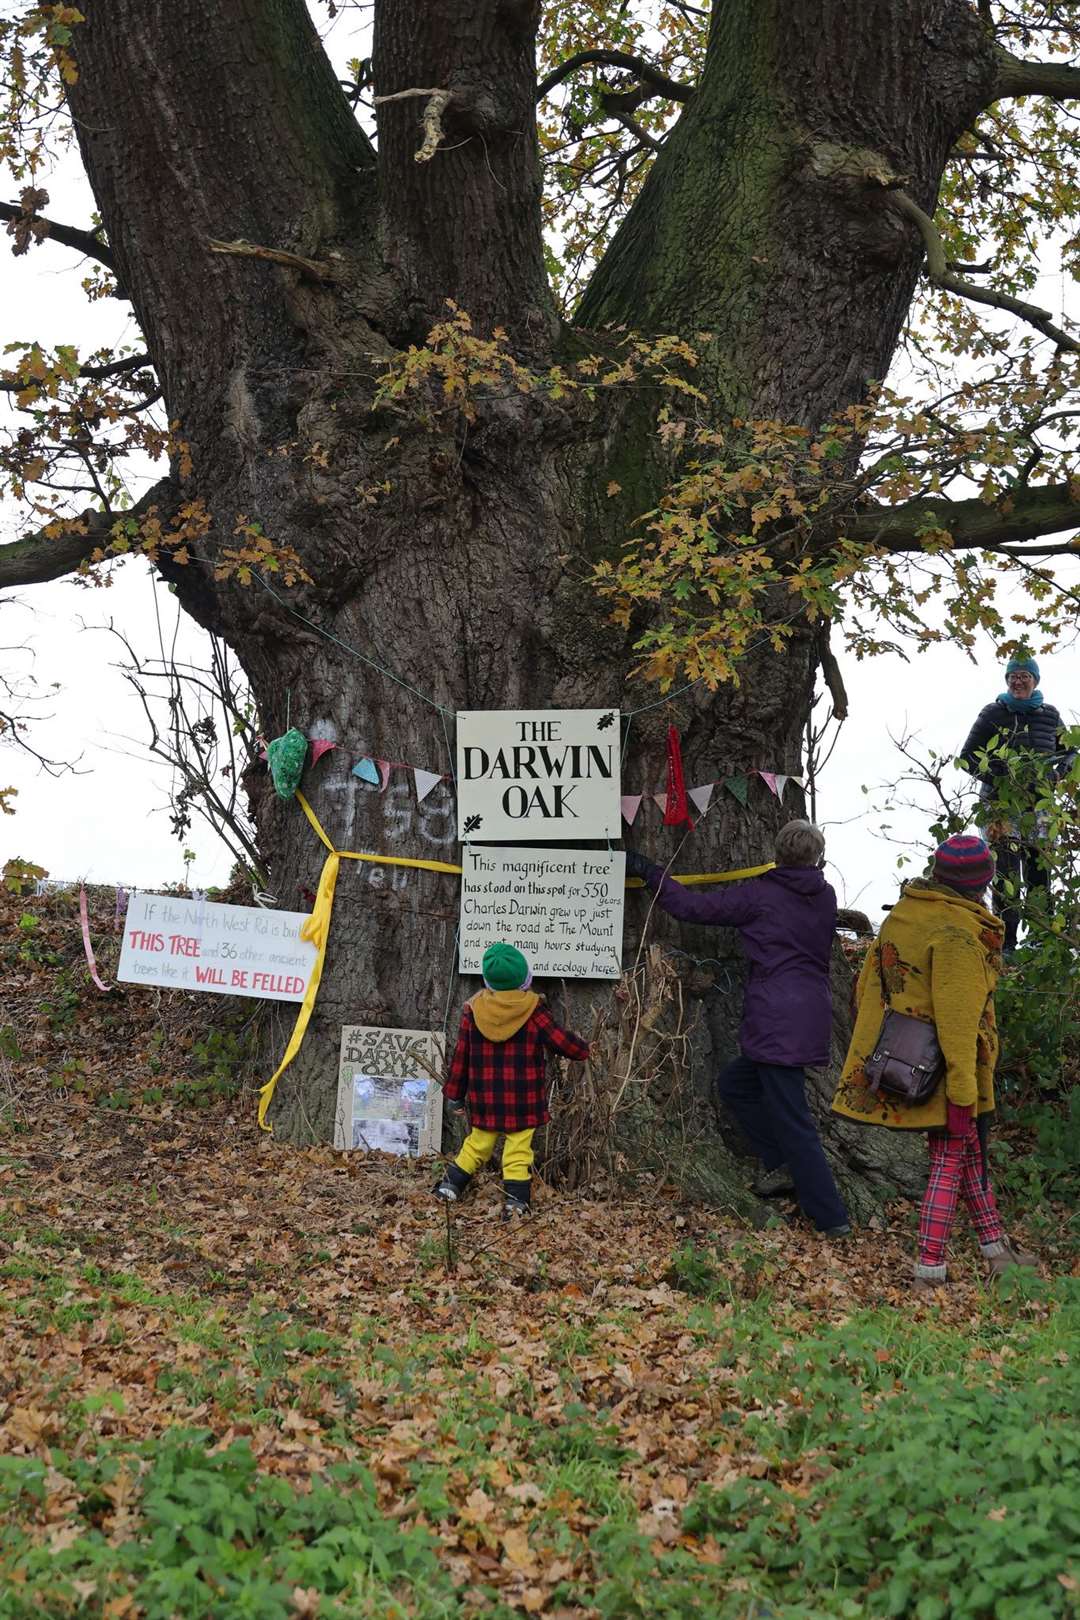 The Darwin Oak was painted and decorated (Chris Warrender/PA)